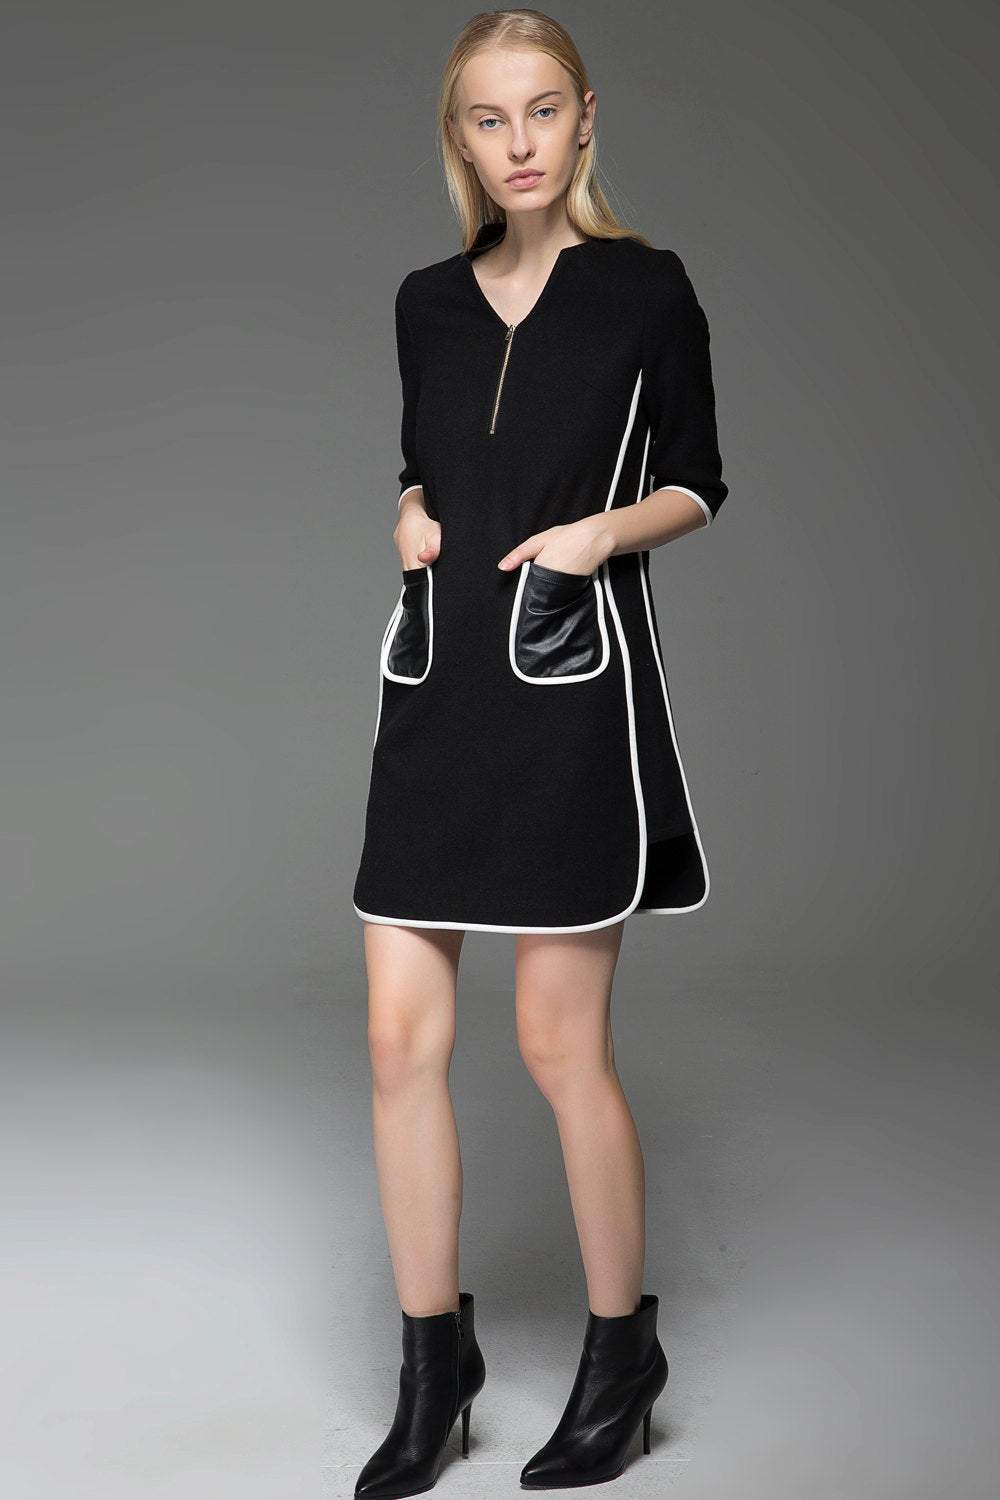 Chanel Style Dress - Black Wool Mini Dress with Cream Piping and Leather  Pockets 60s Era Vintage Style Womens Dress C778